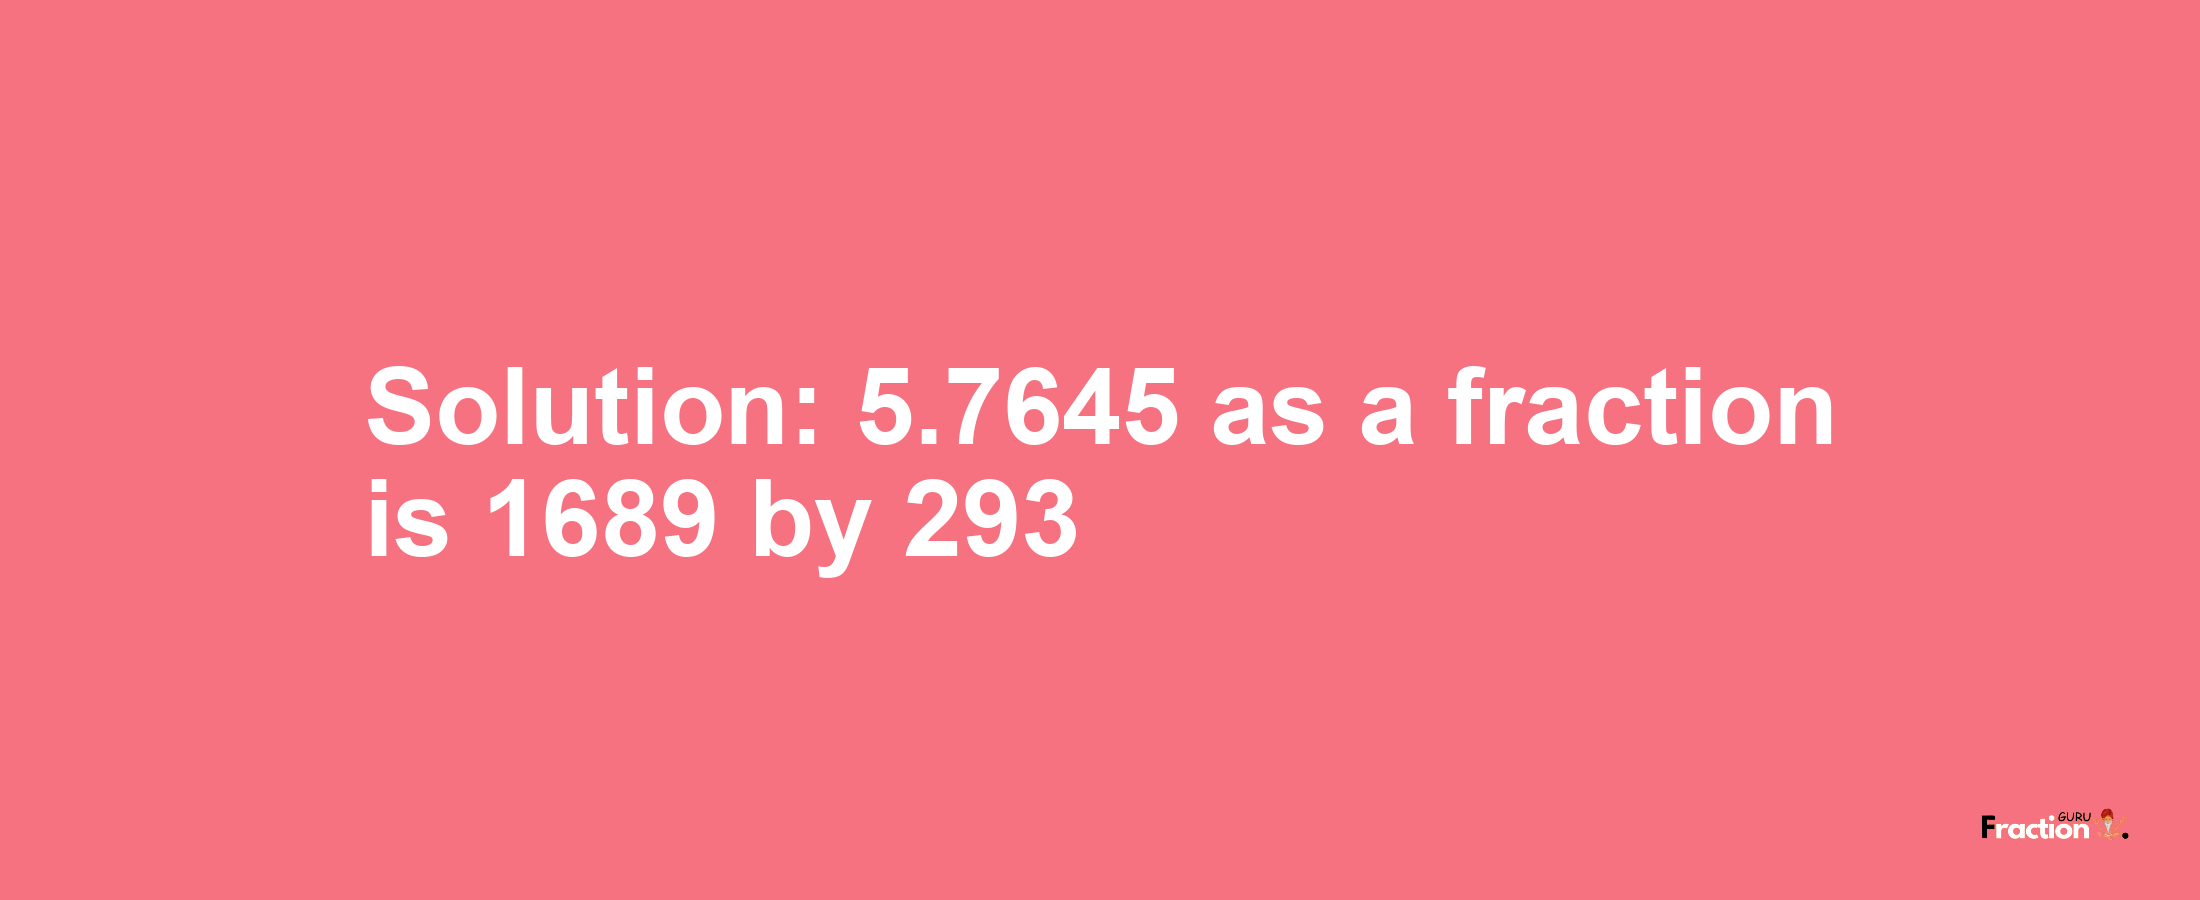 Solution:5.7645 as a fraction is 1689/293